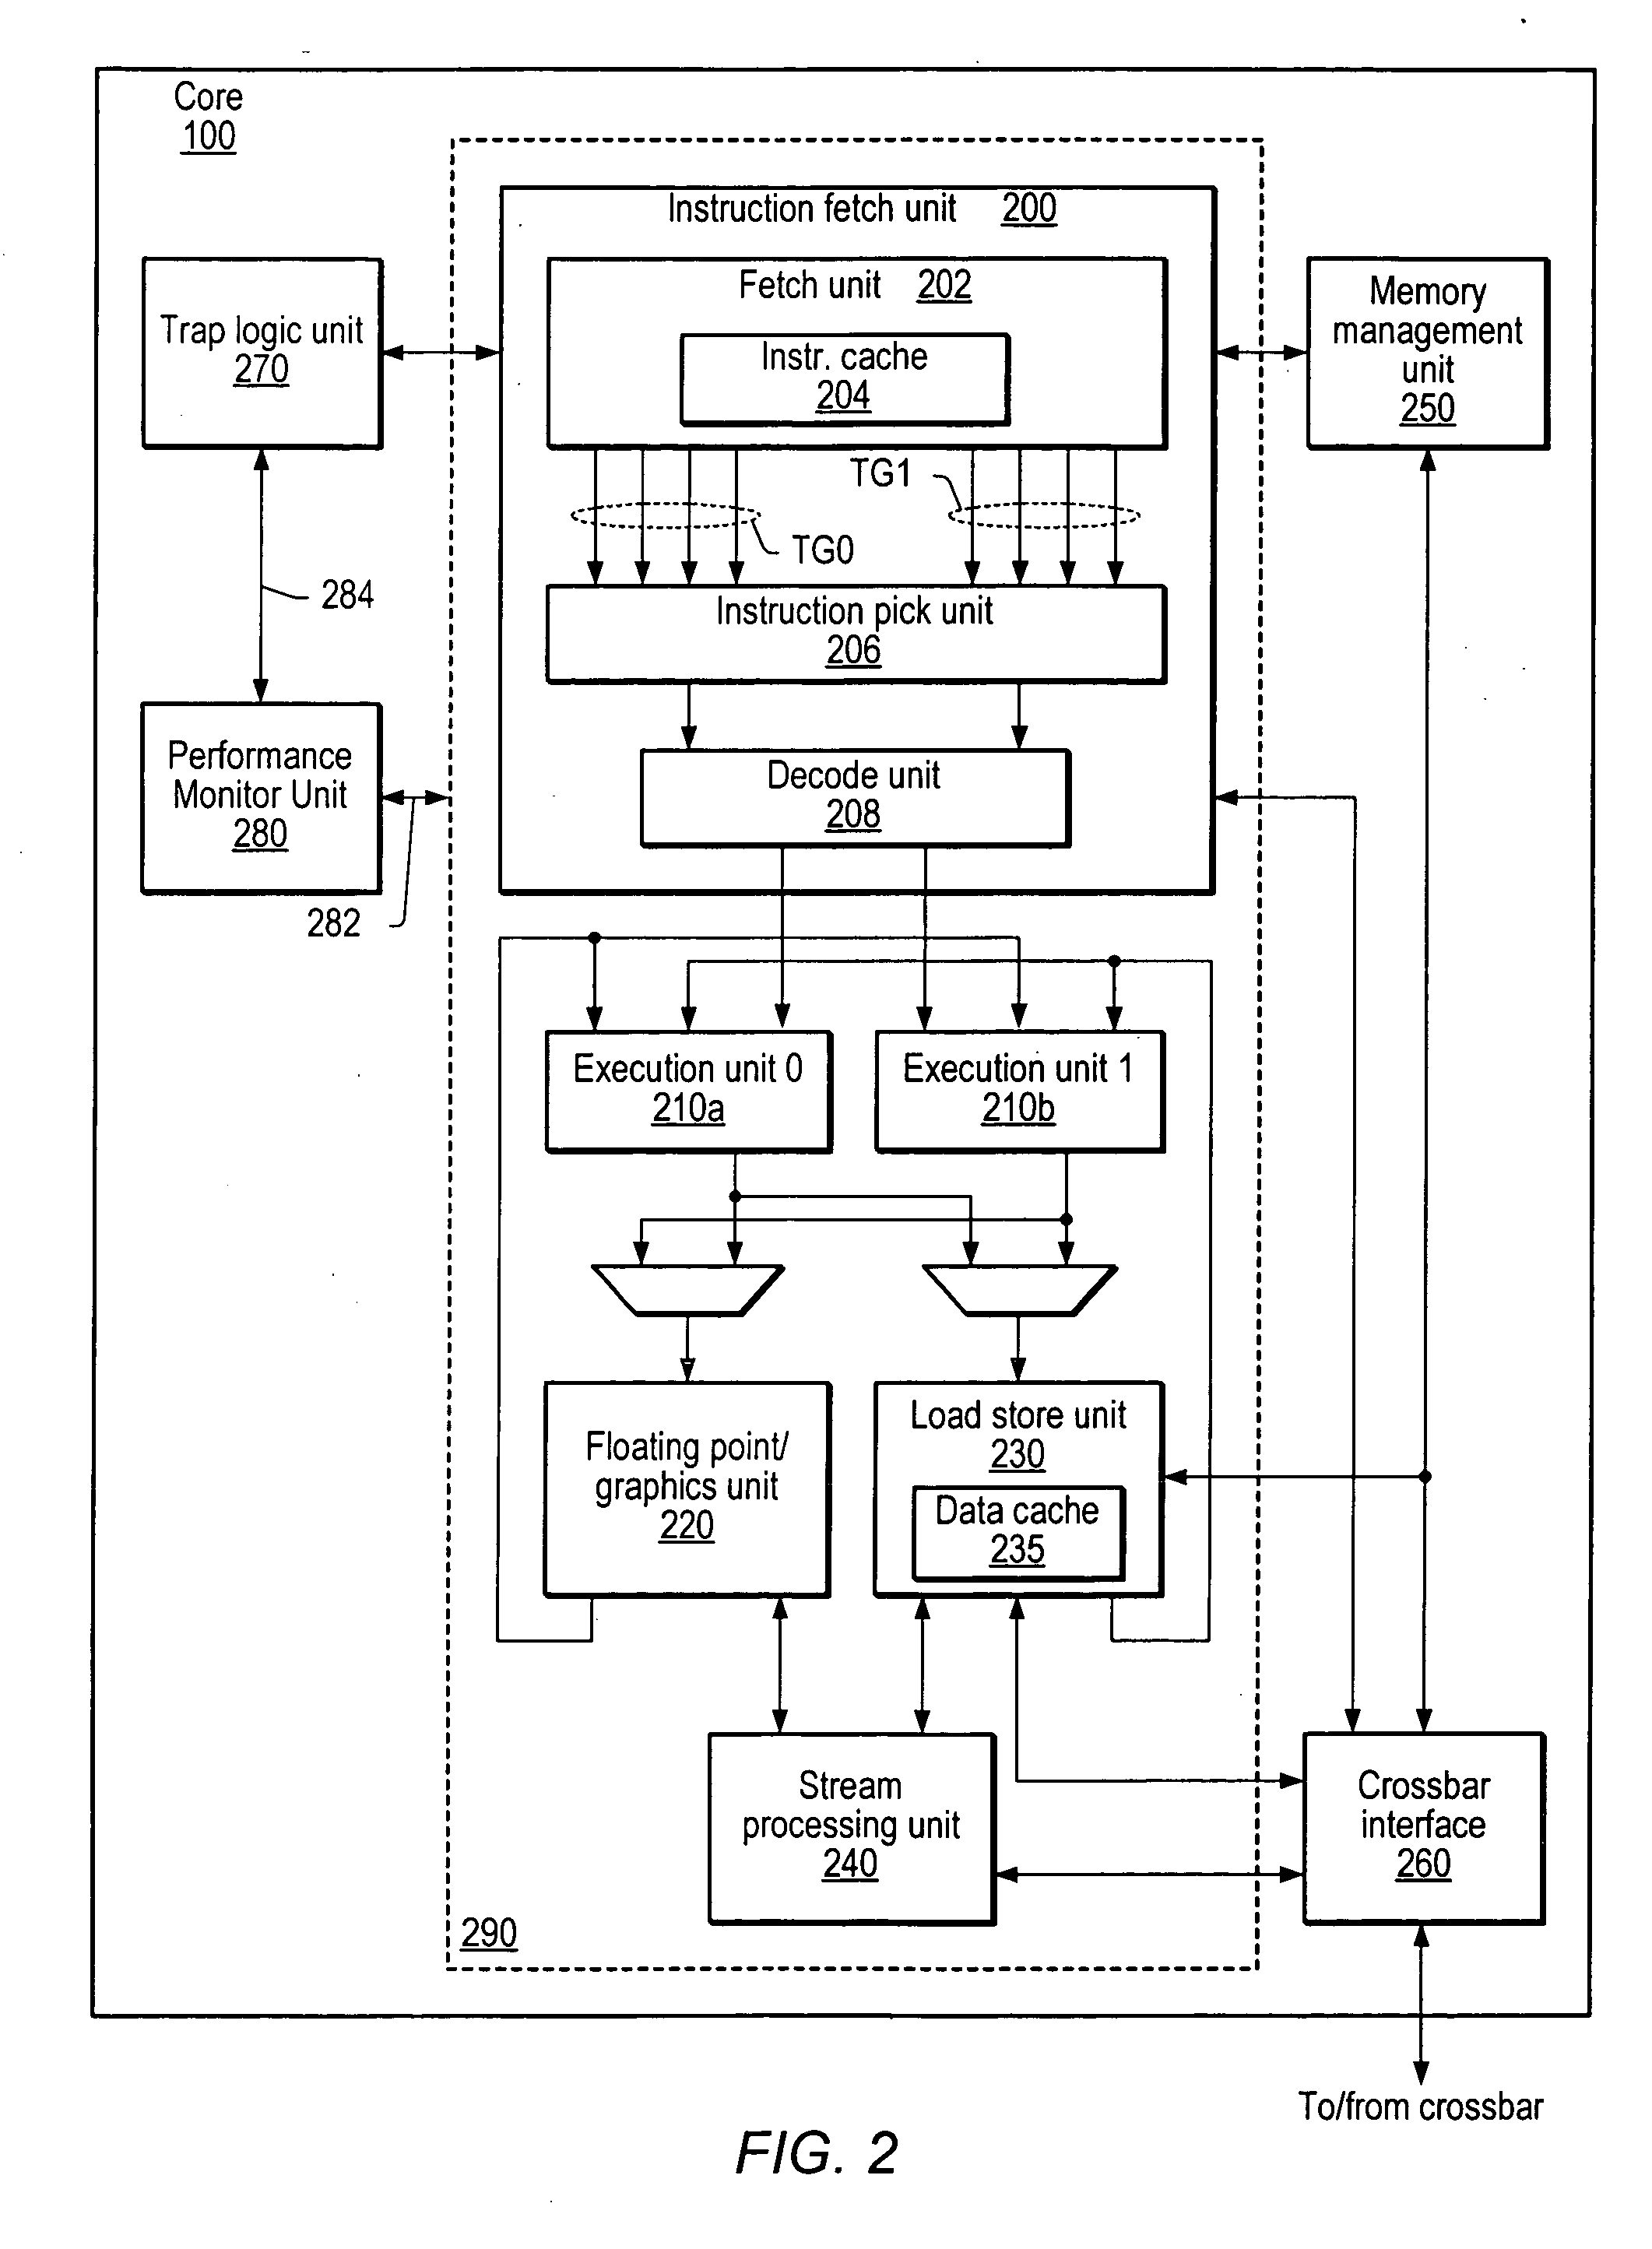 Method and apparatus for precisely identifying effective addresses associated with hardware events